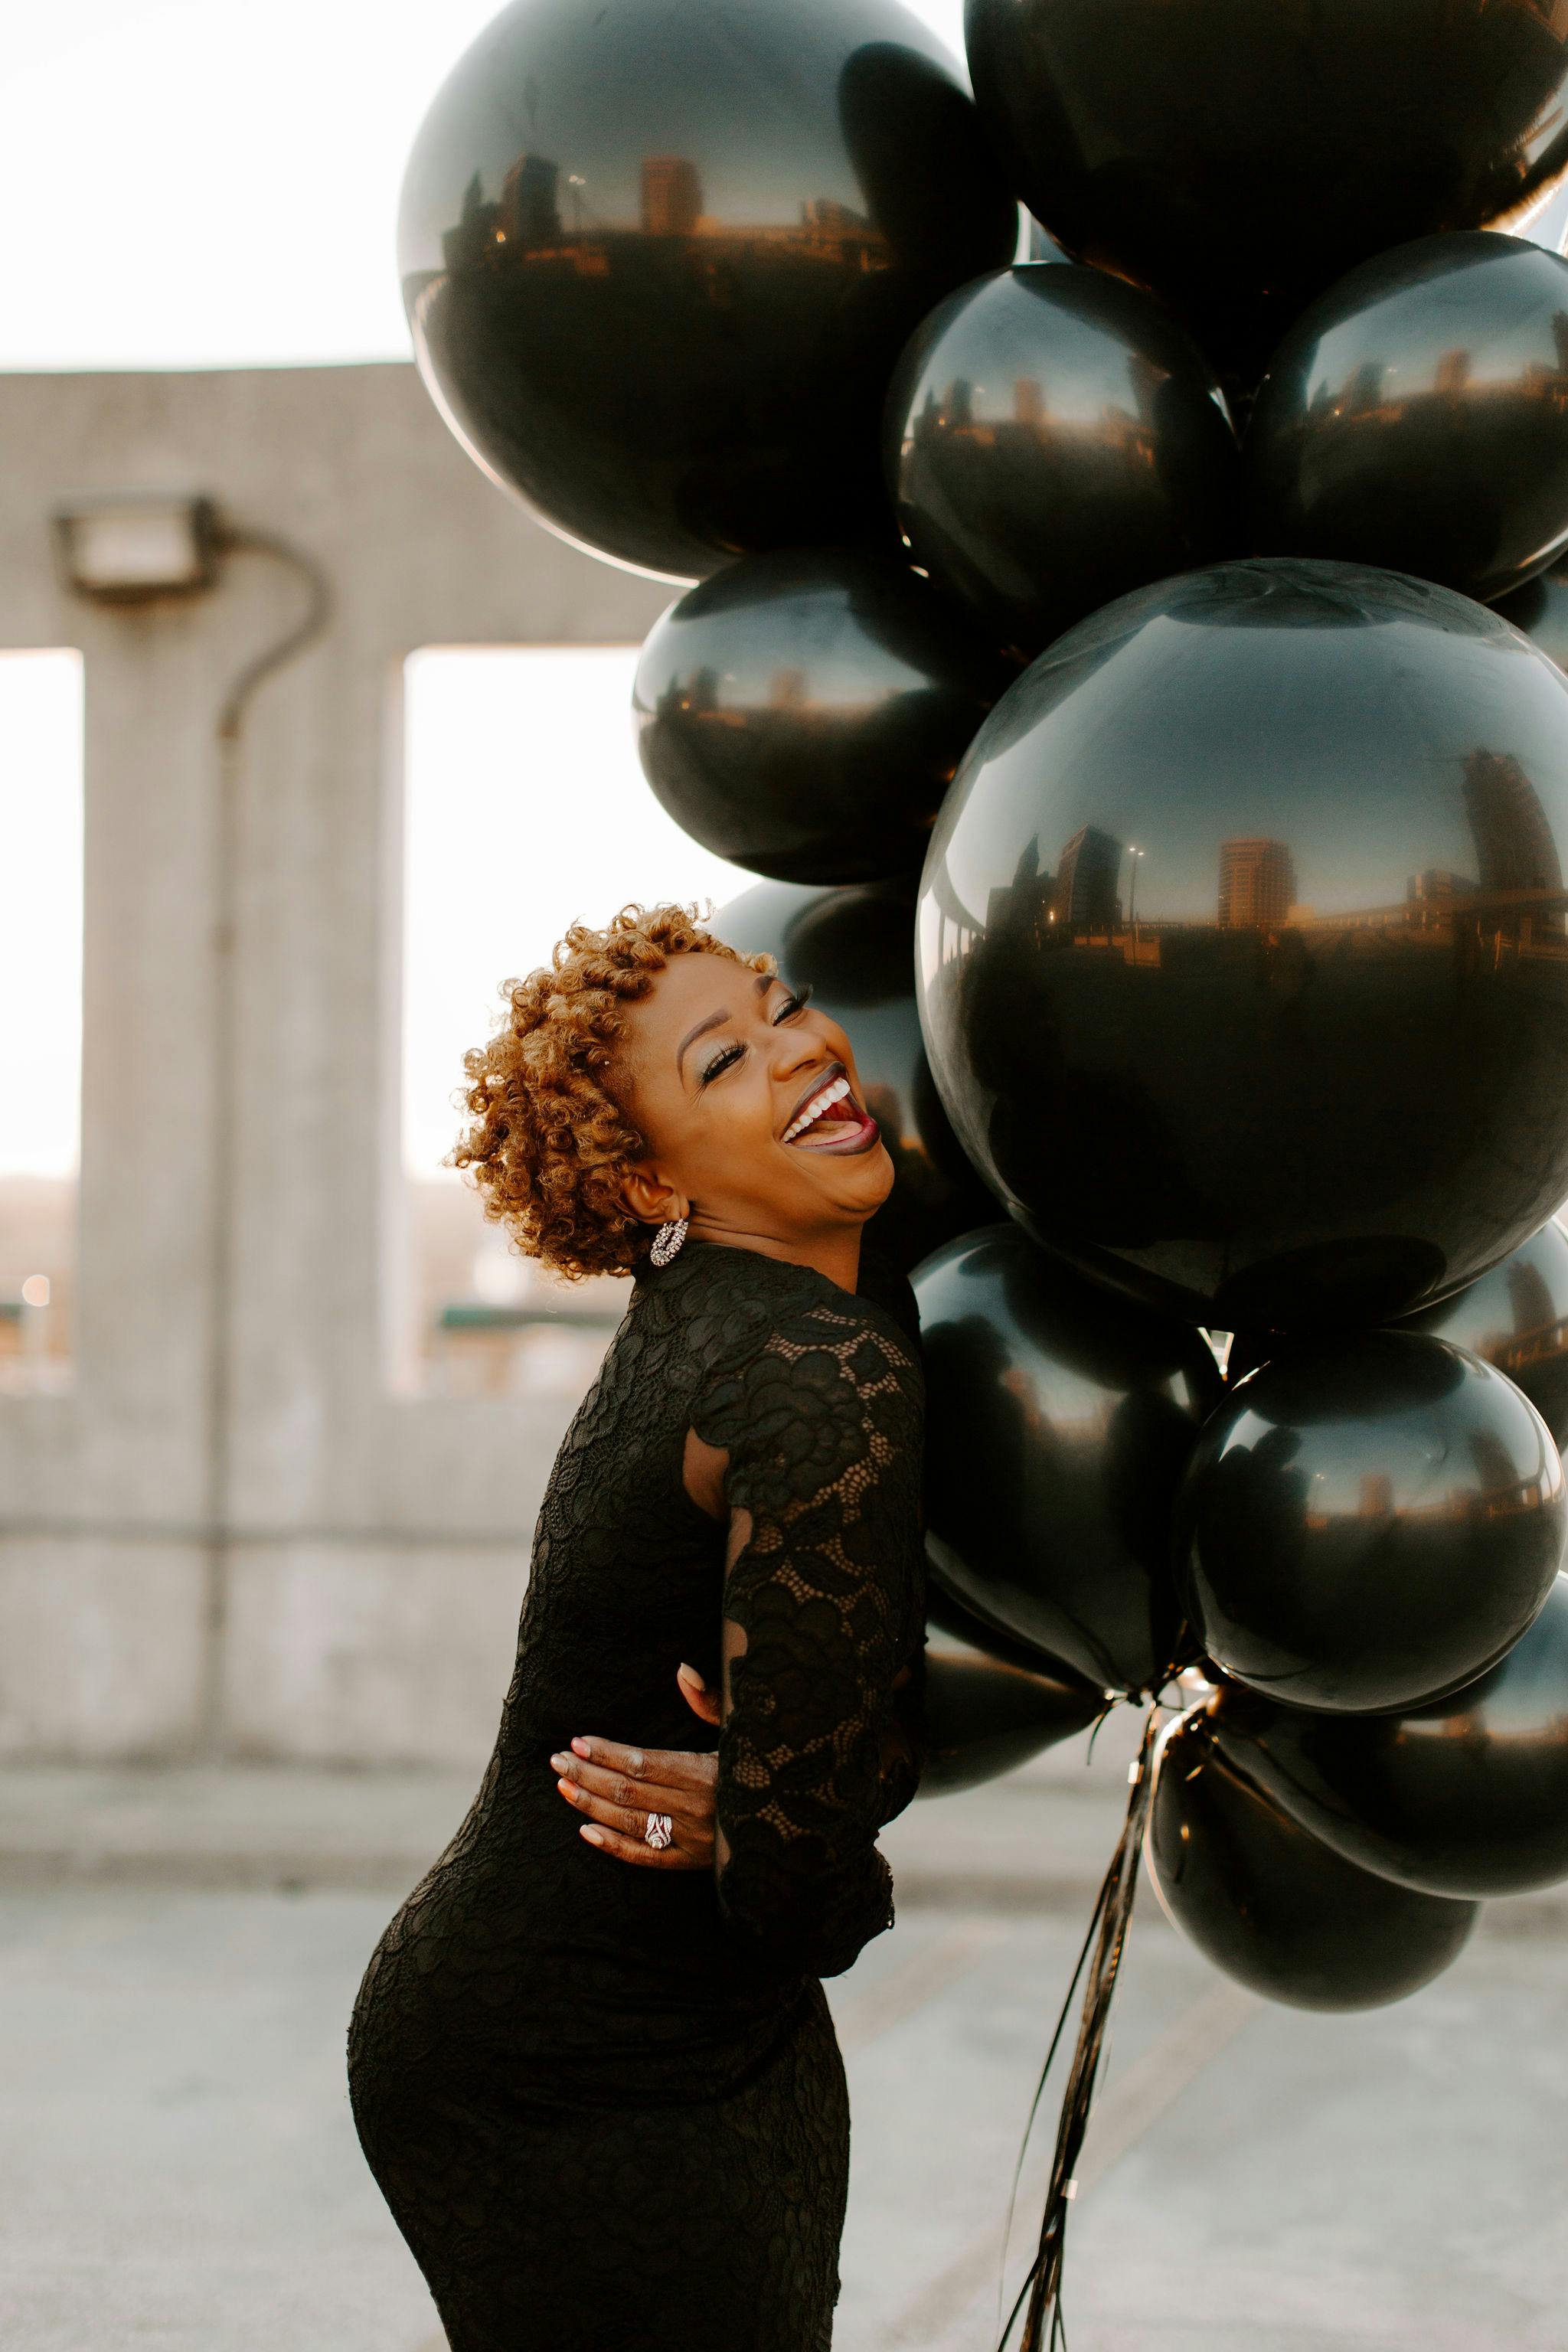 A woman laughing while holding balloons | Source: Pexels